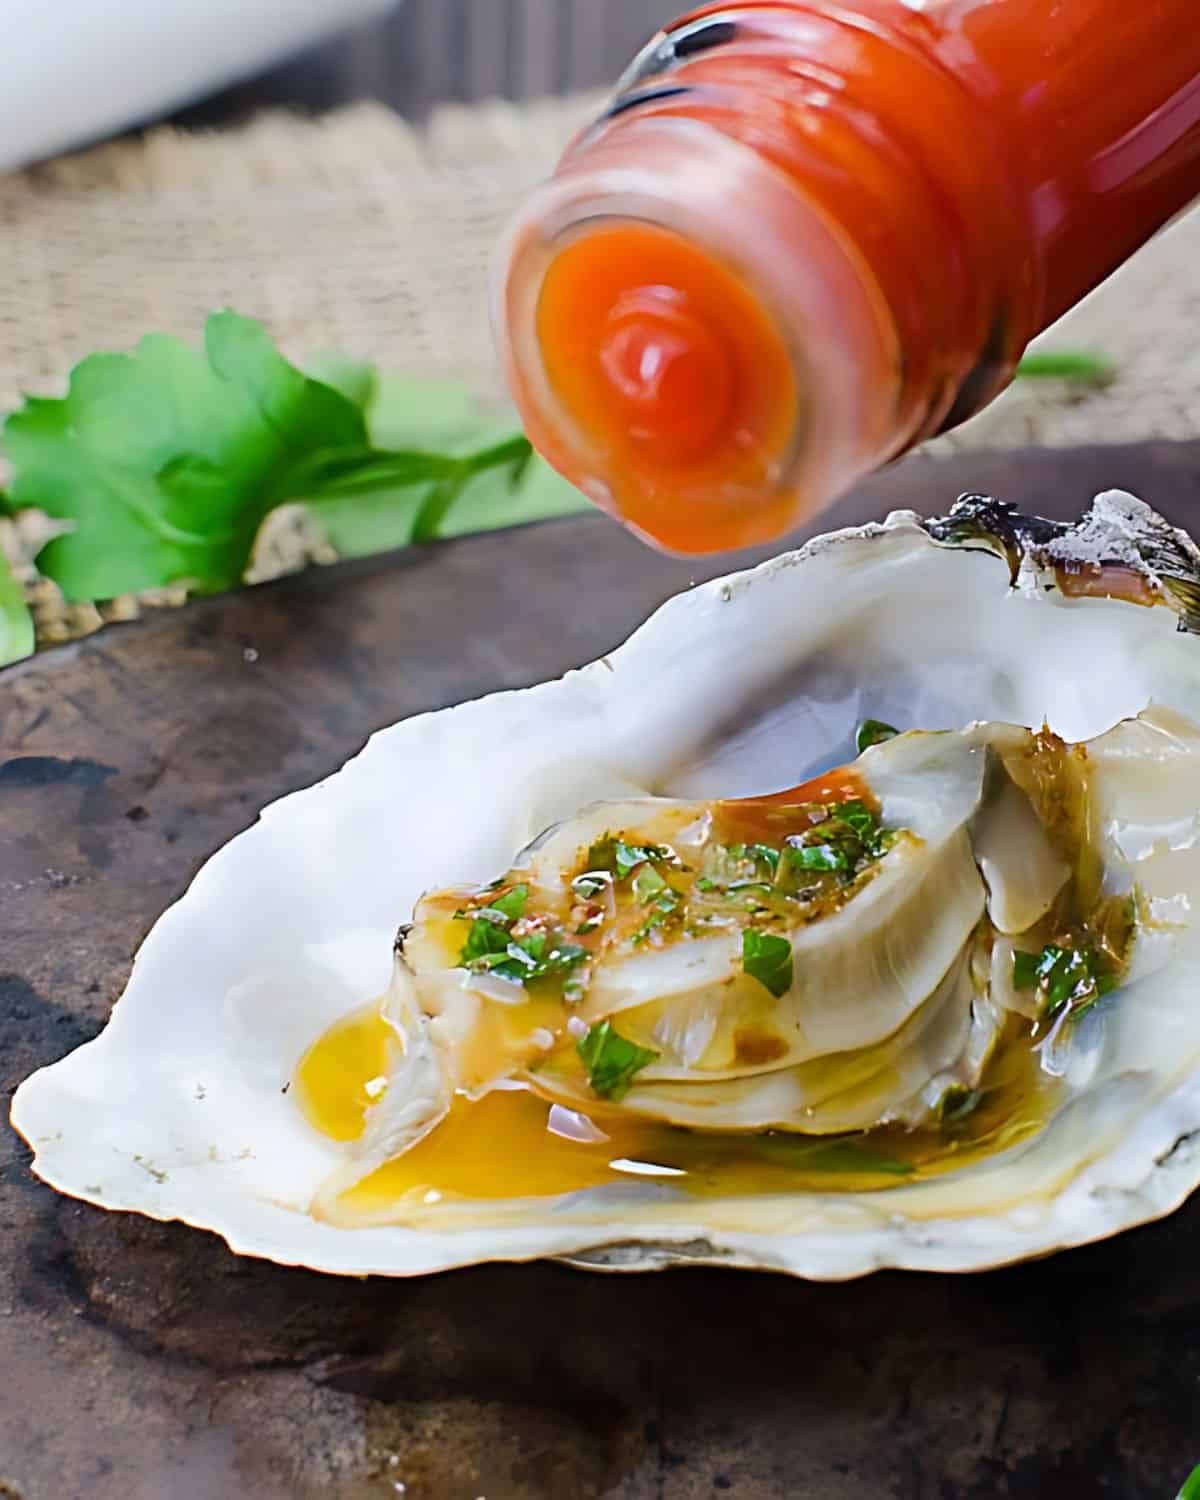 Mardi Gras grilled oysters with hot sauce.